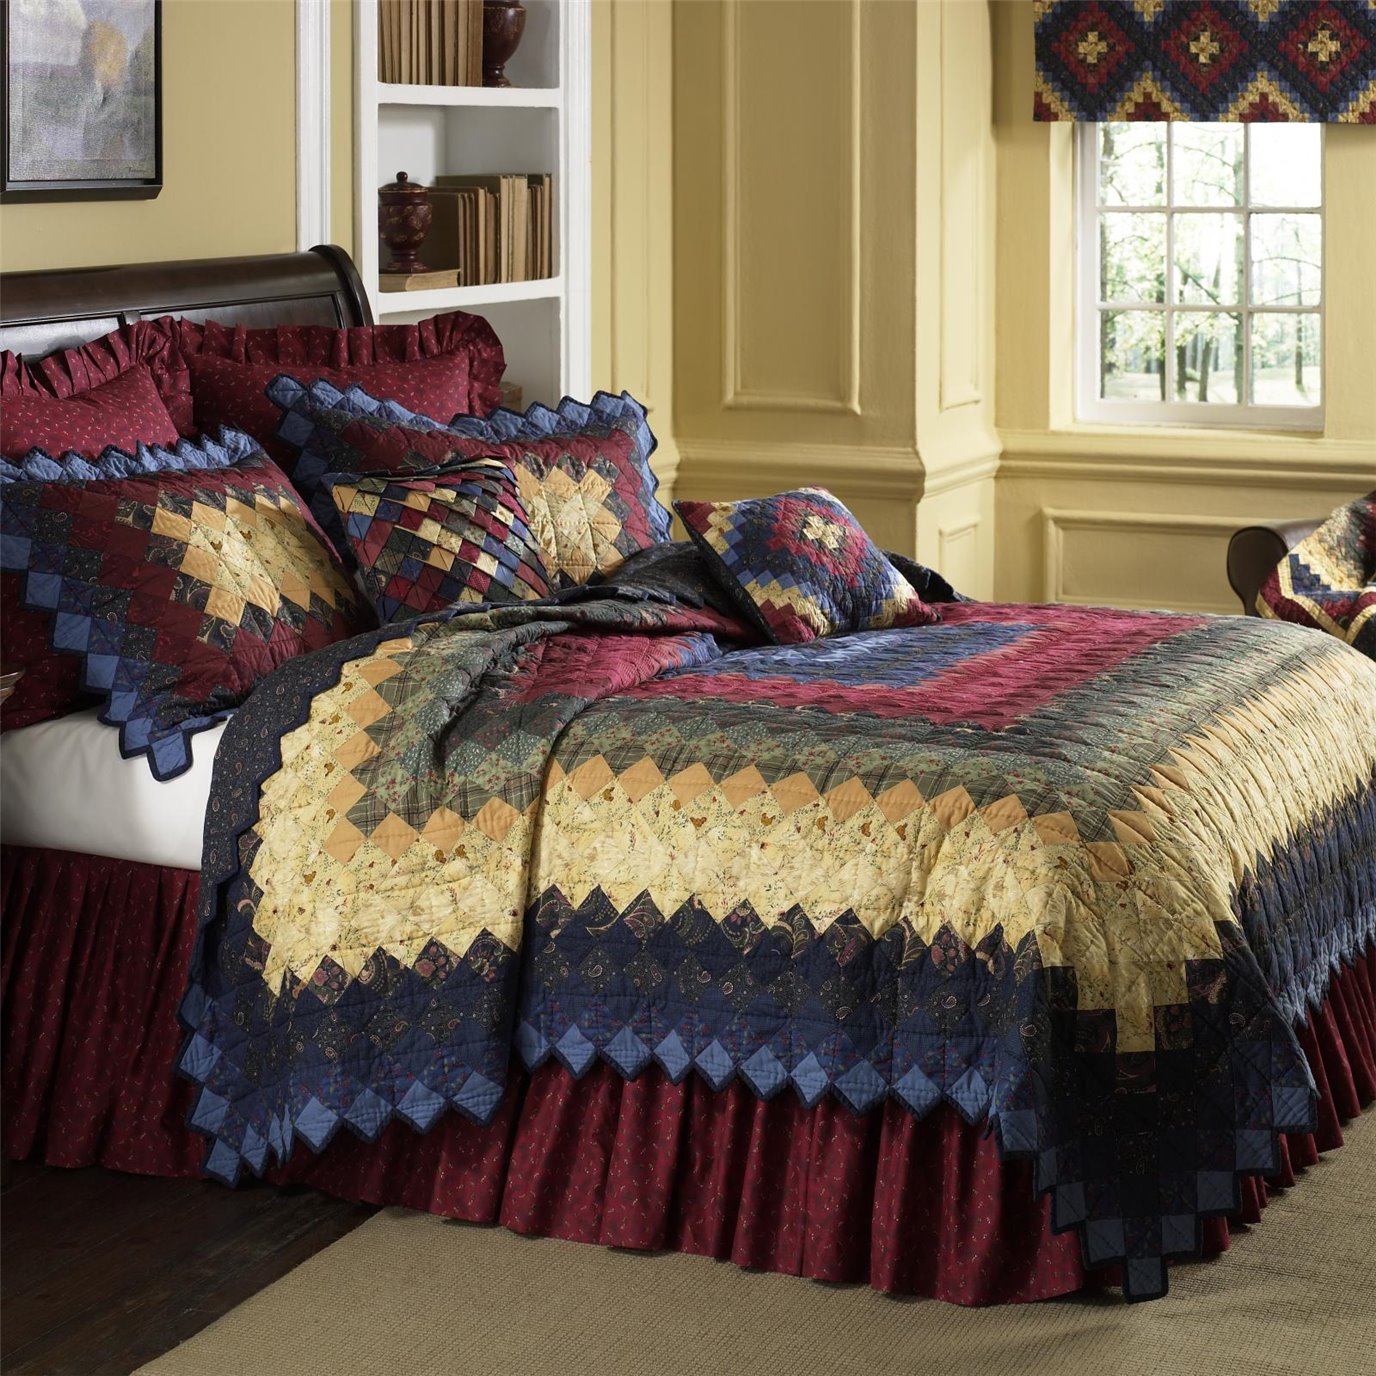 Chesapeake Trip Deluxe King Quilt